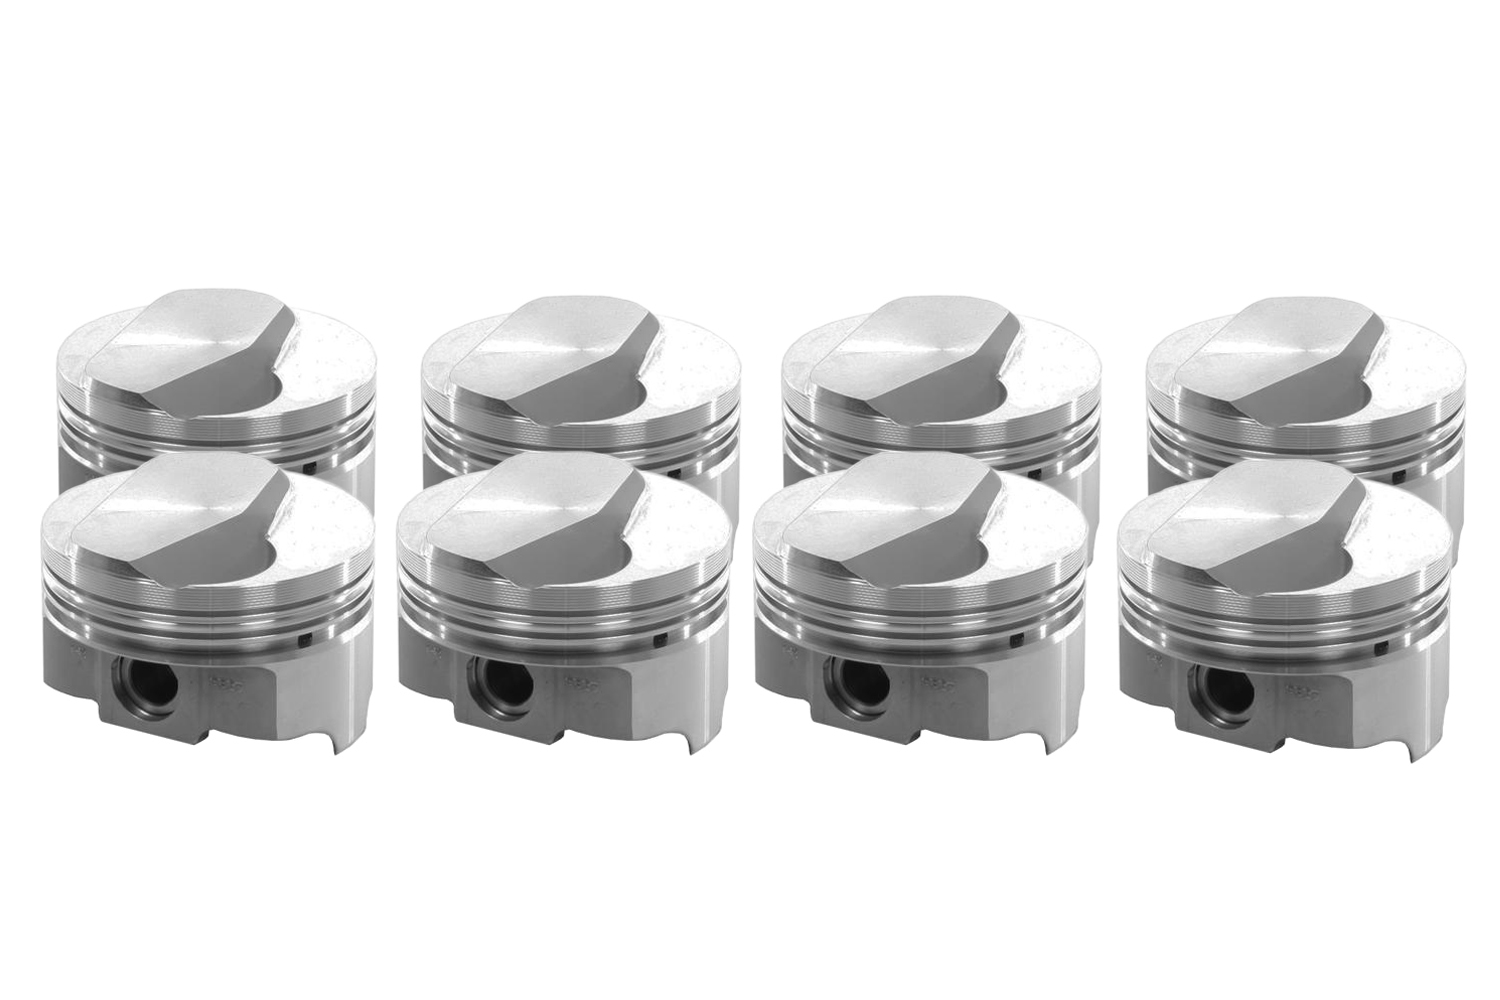 Icon Pistons IC9919.060 Piston, FHR Forged, Forged, 4.310 in Bore, 5/64 x 5/64 x 3/16 in Ring Grooves, Minus 18.30 cc, Big Block Chevy, Set of 8